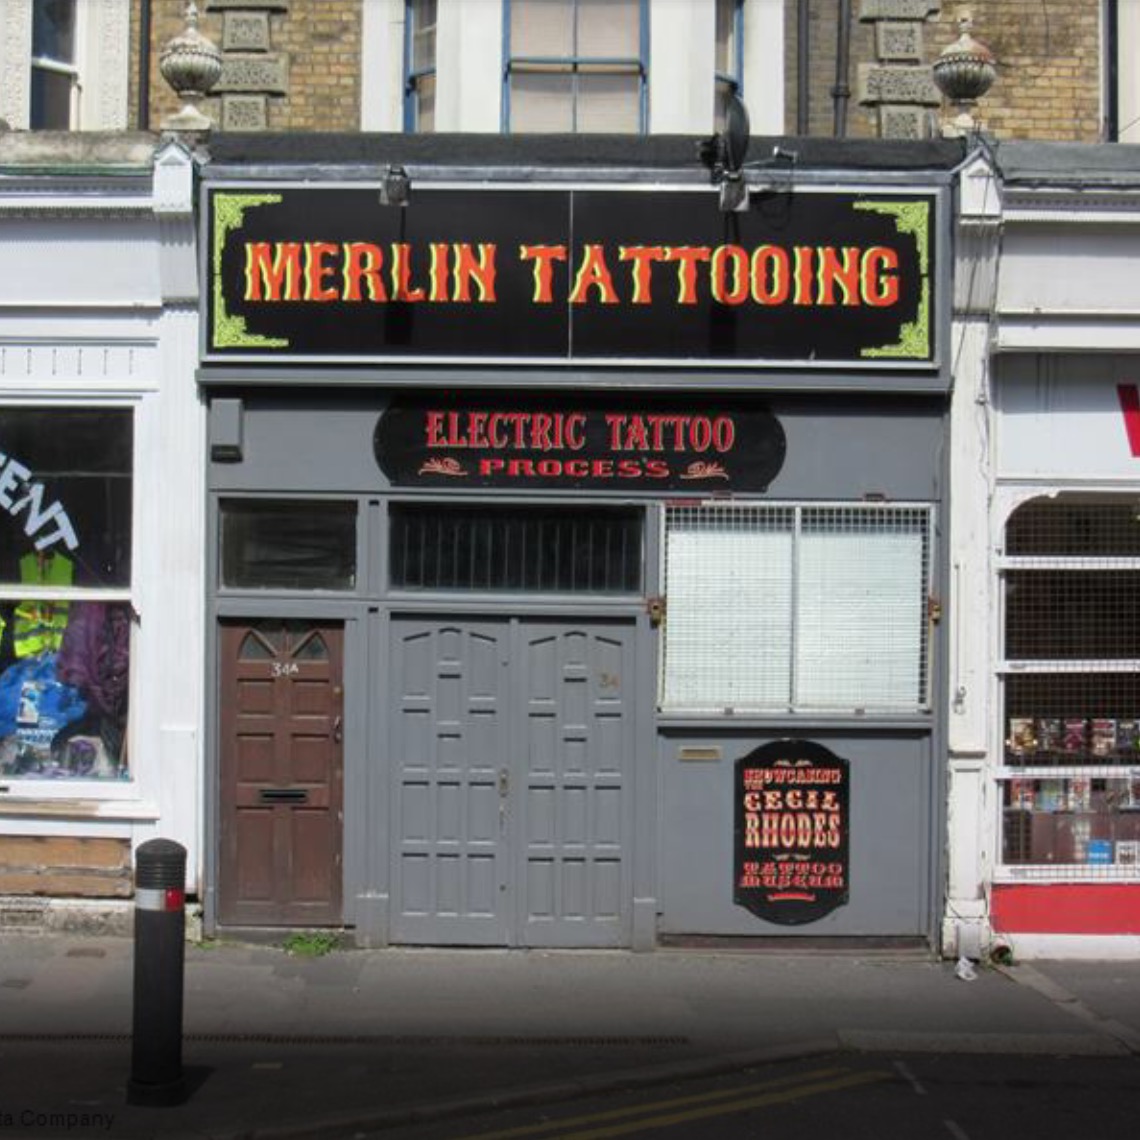 Merlin Tattooing in Dover 2013